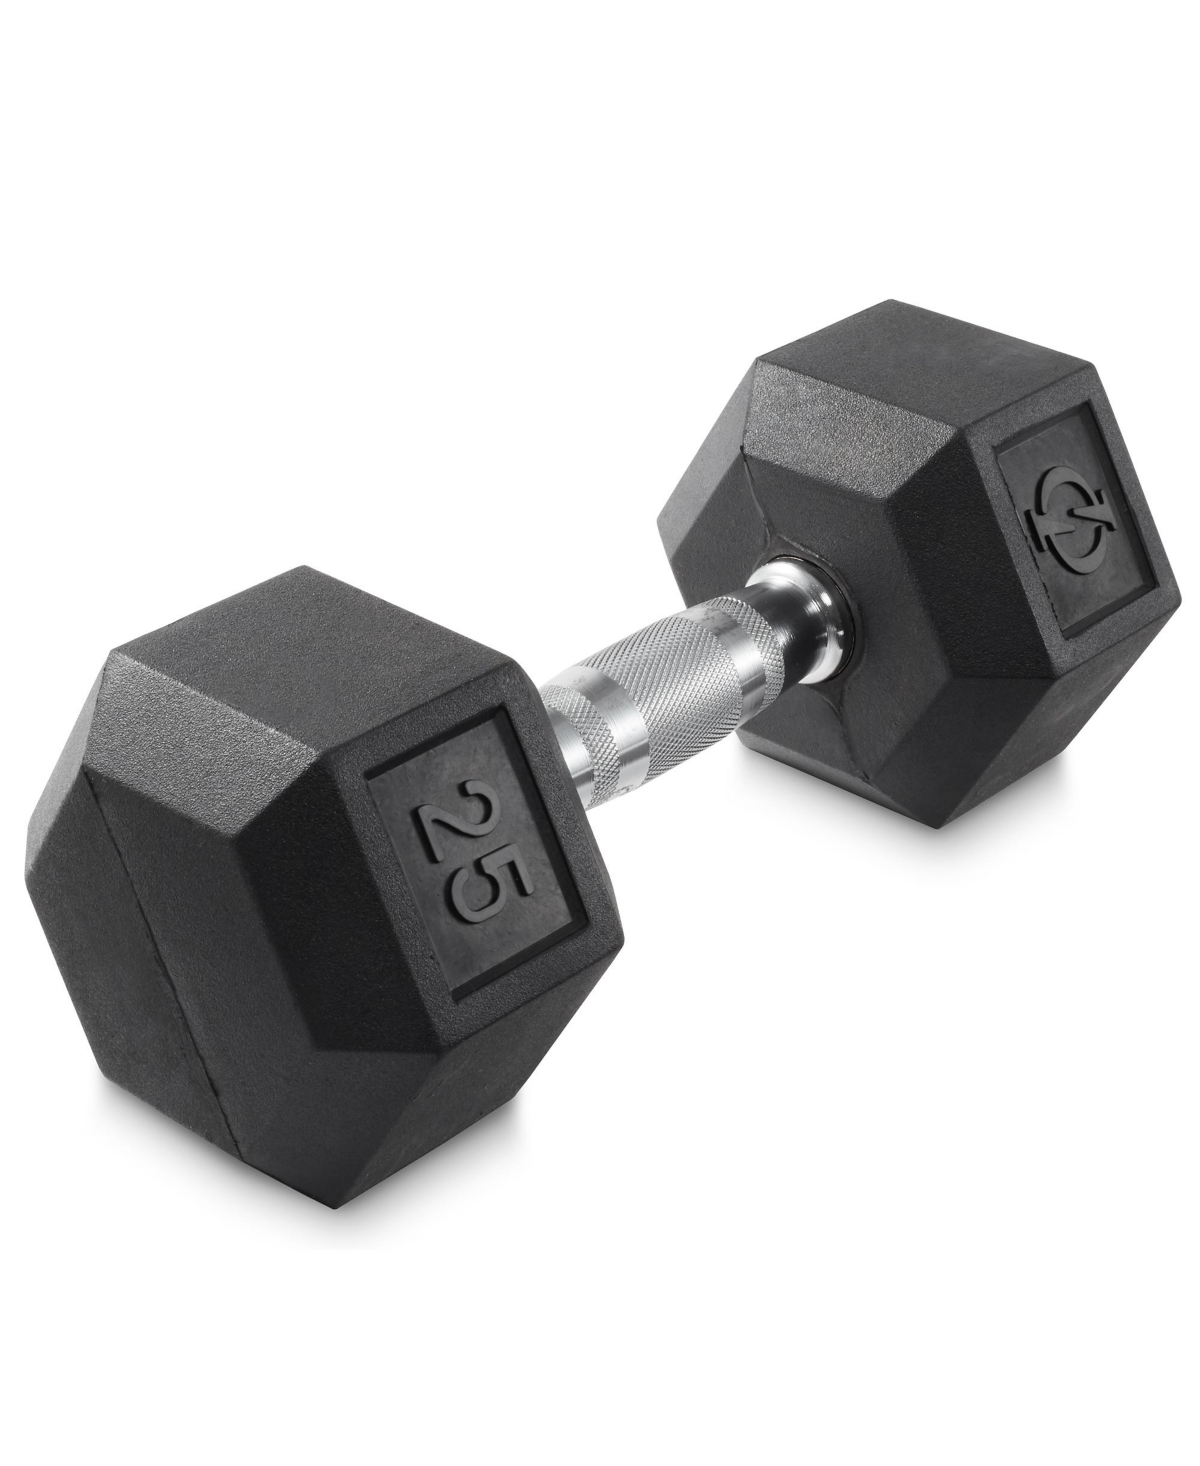 Rubber Coated Hex Dumbbell Hand Weight, 25 lbs - Black